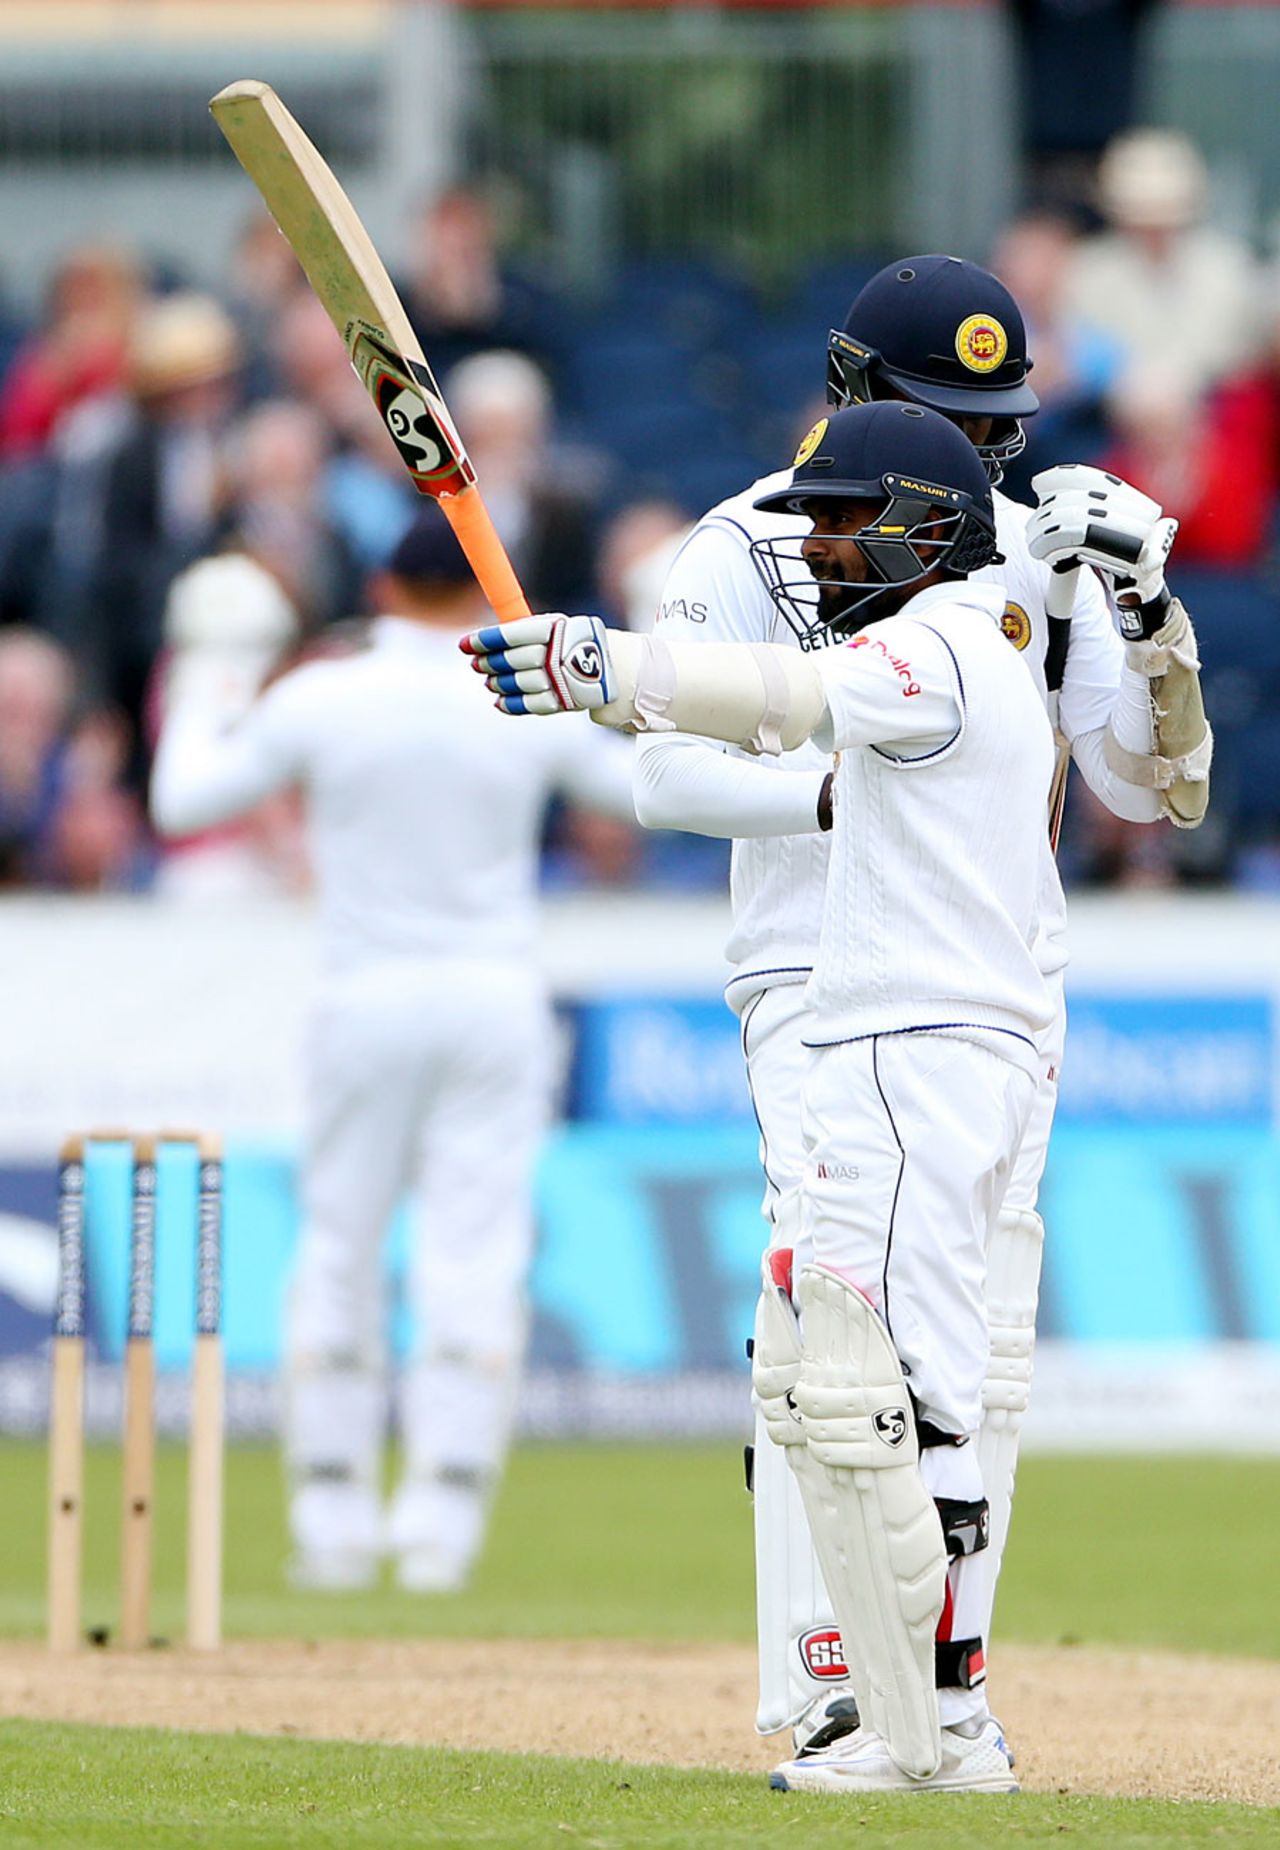 Kaushal Silva reached a fighting half-century, England v Sri Lanka, 2nd Test, Chester-le-Street, 3rd day, May 29, 2016